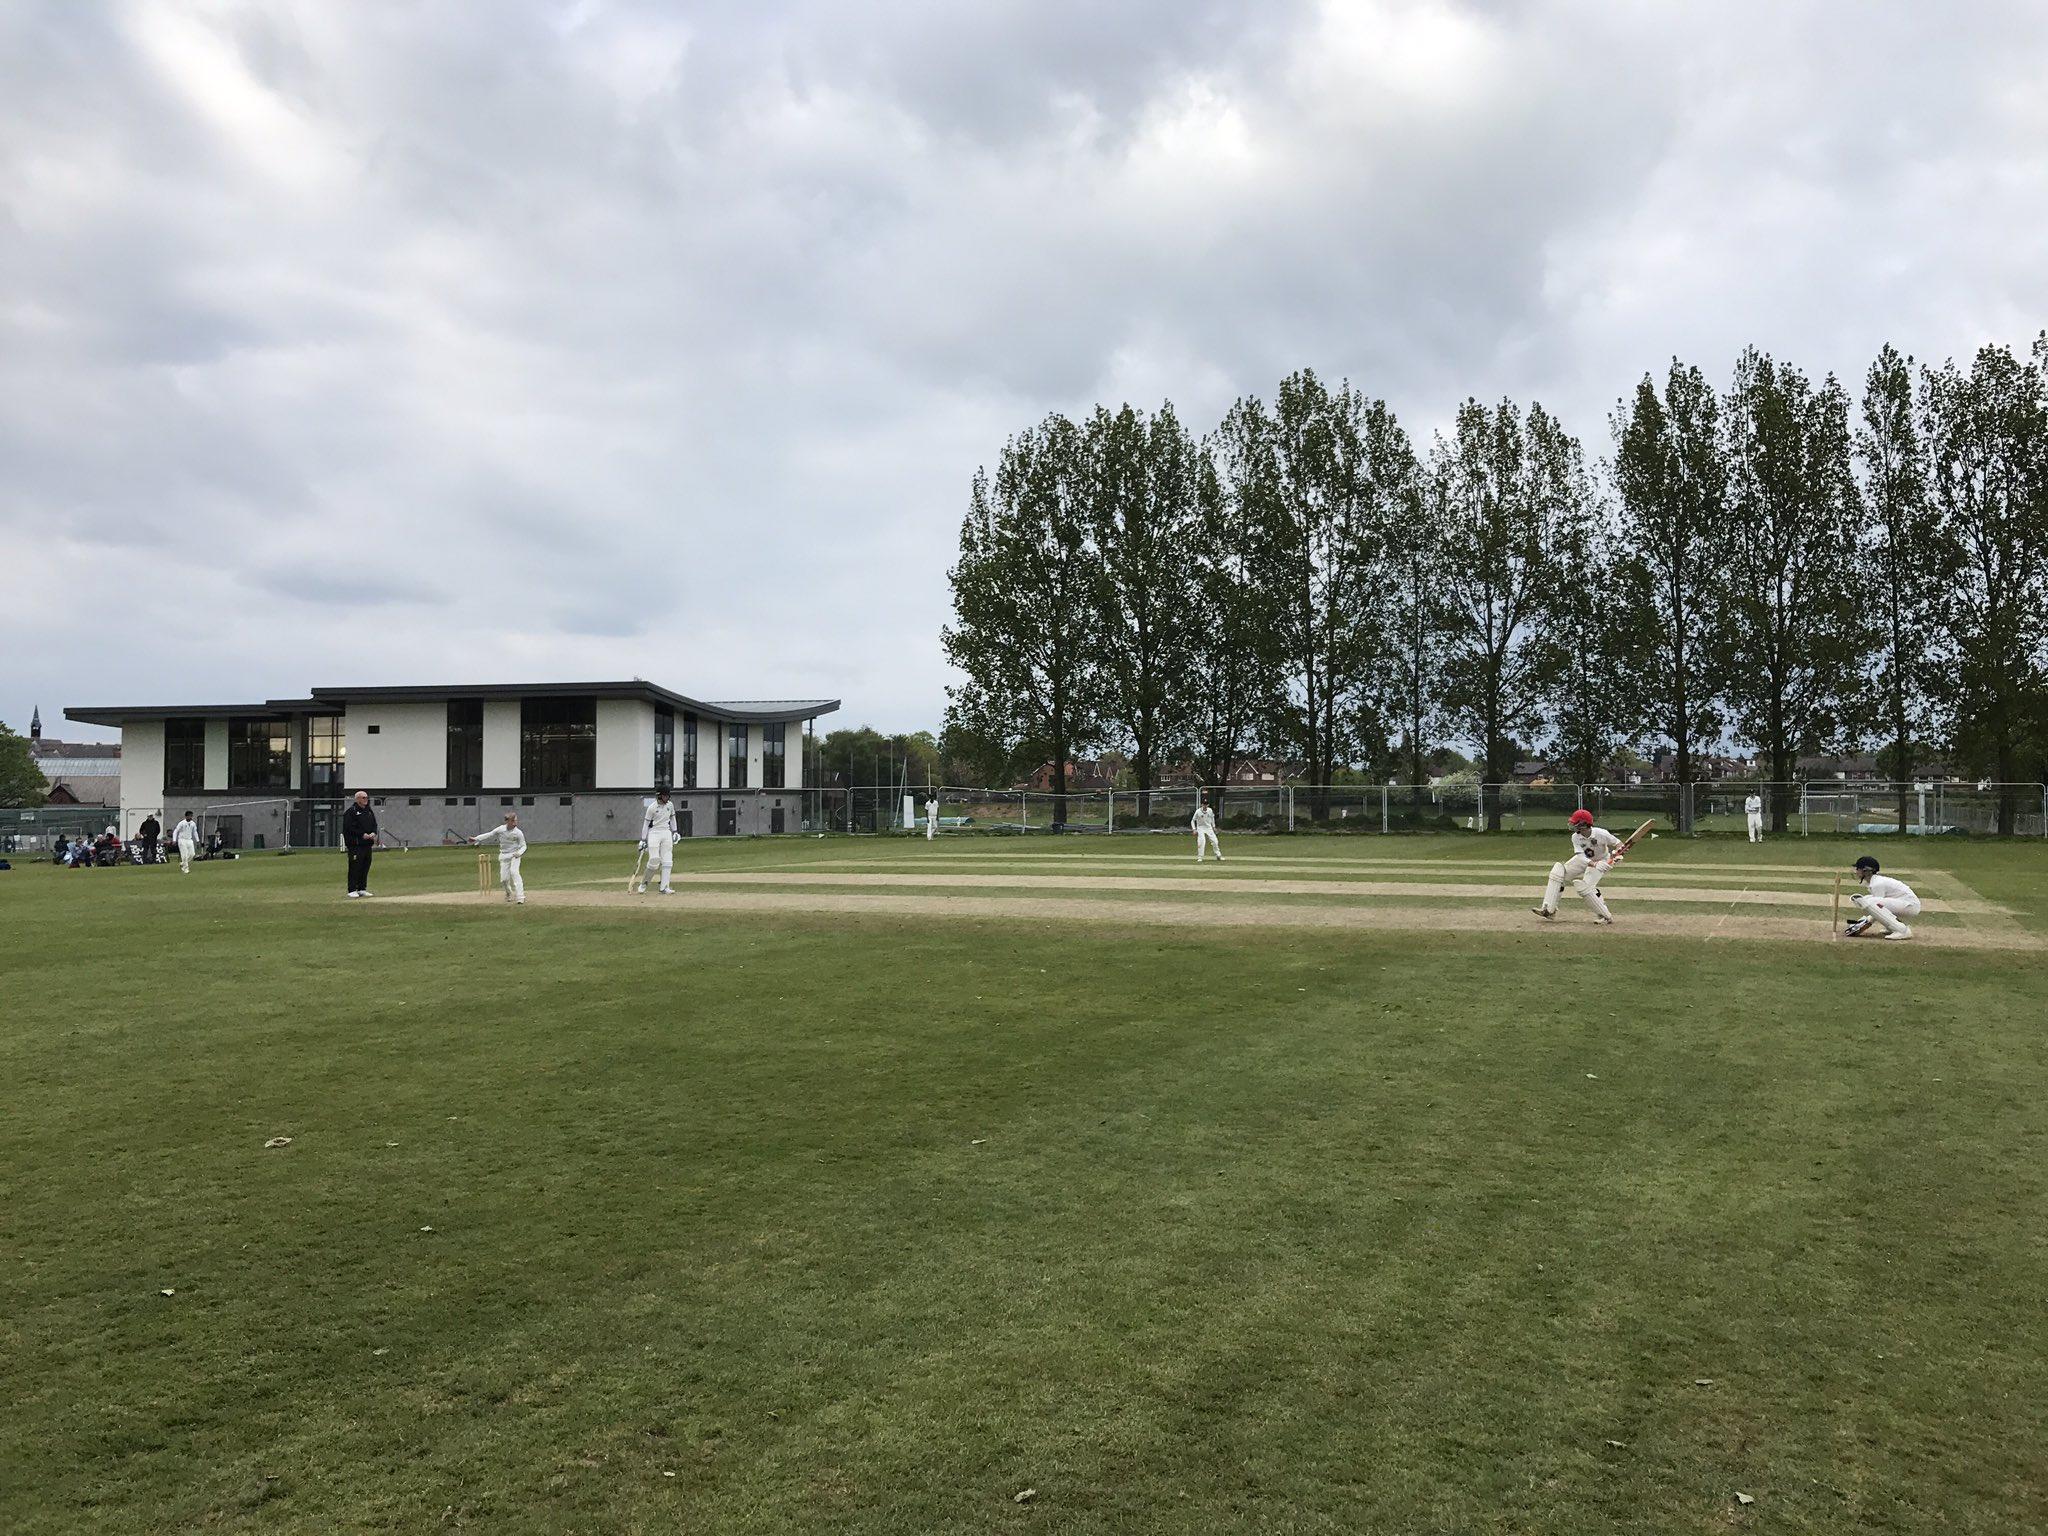 cheadle hulme school's U15 cricketers play a match against Cheshire County U14s on the School field in front of the new pavilion